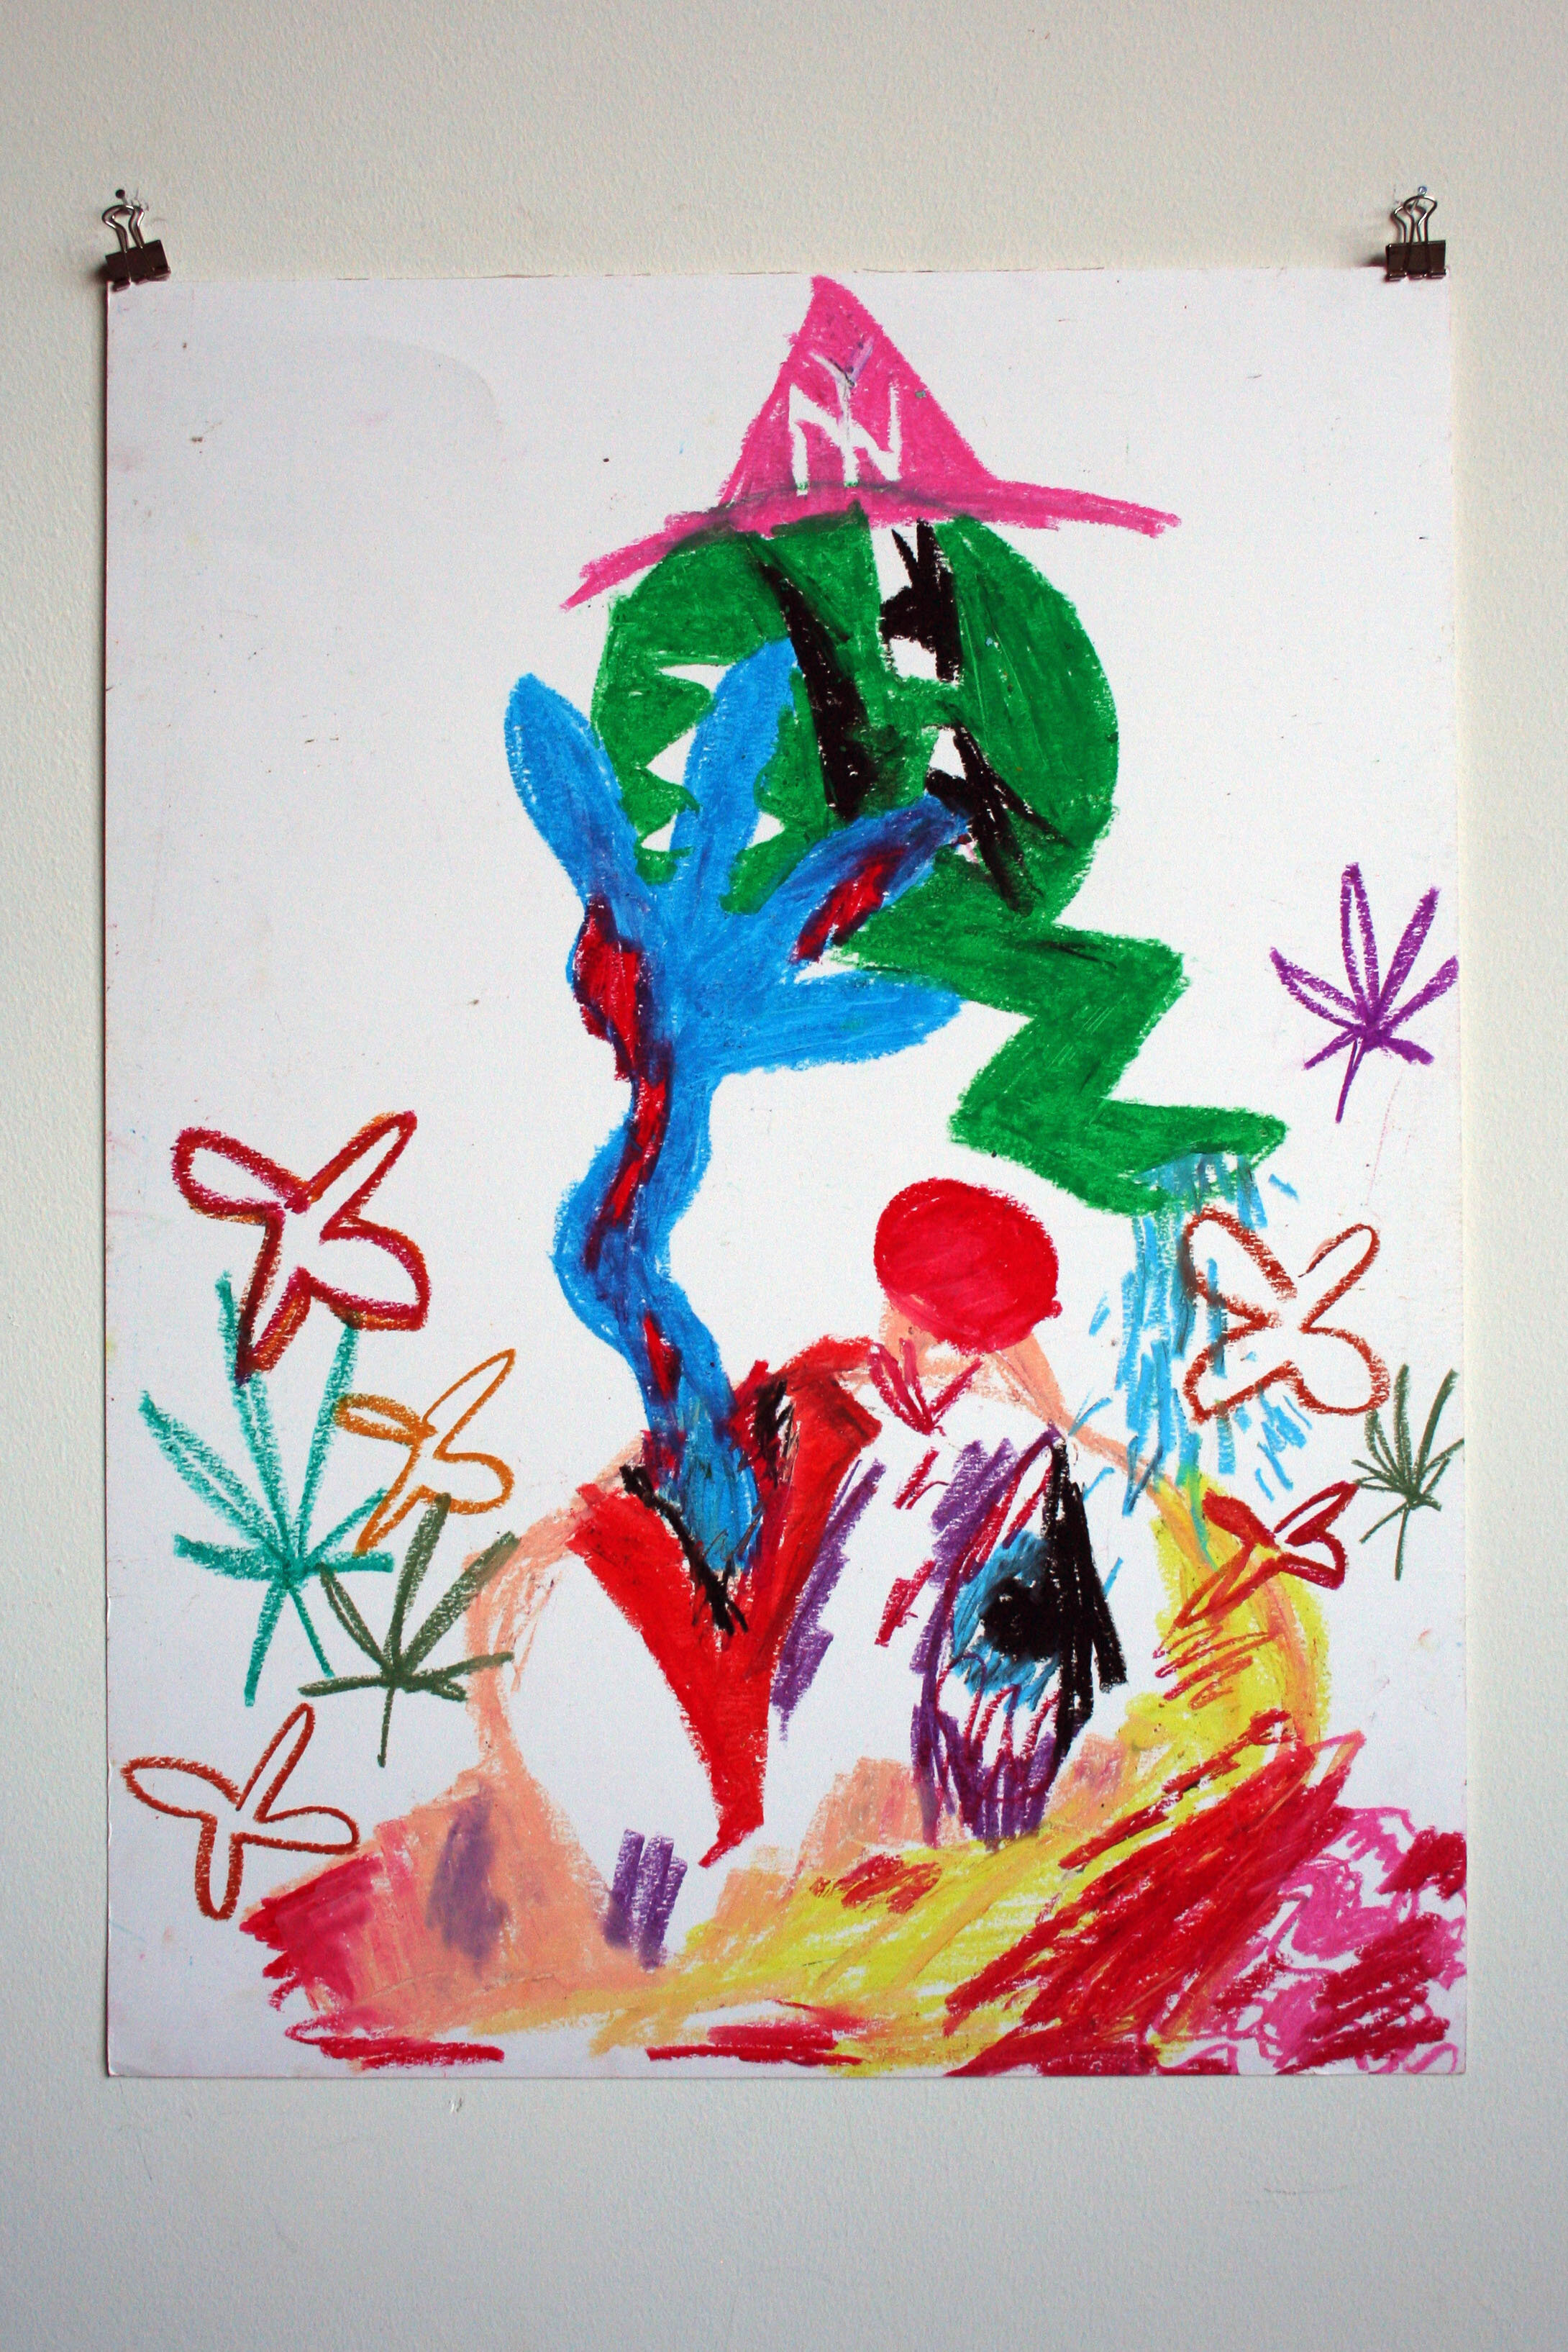   Severed Blonde Head and Ms. Green Bong,  2014  24 x 18 inches (60.96 x 45.72 cm.)  Oil pastel on paper 